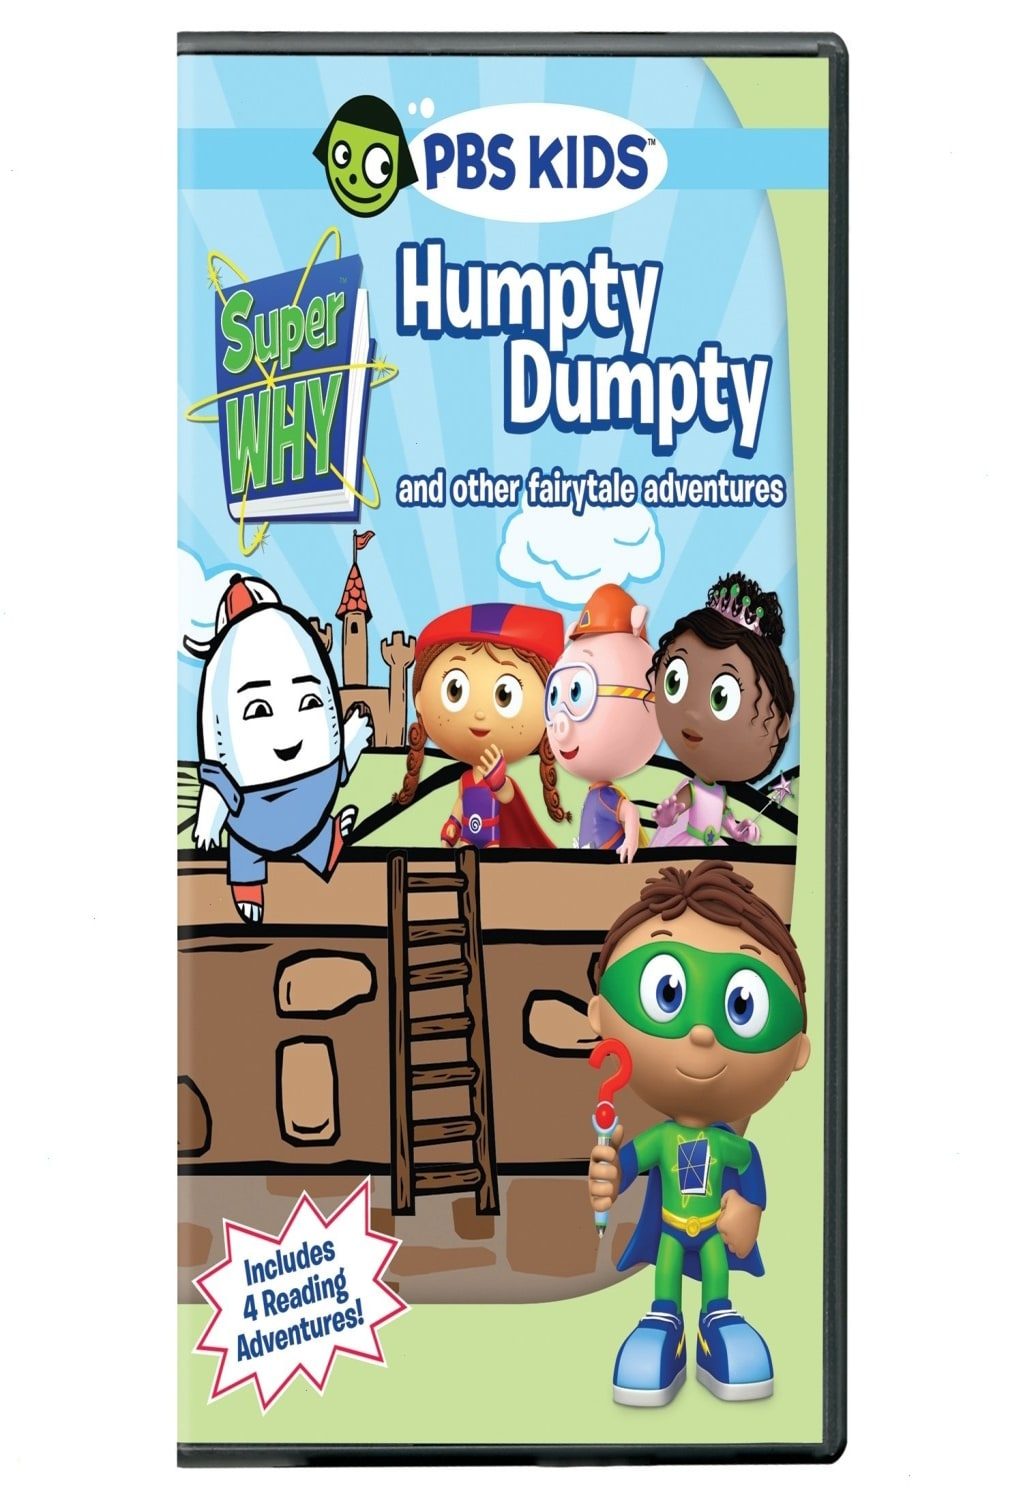 Super Why!: Humpty Dumpty and Other Fairytale Adventures (DVD) on MovieShack